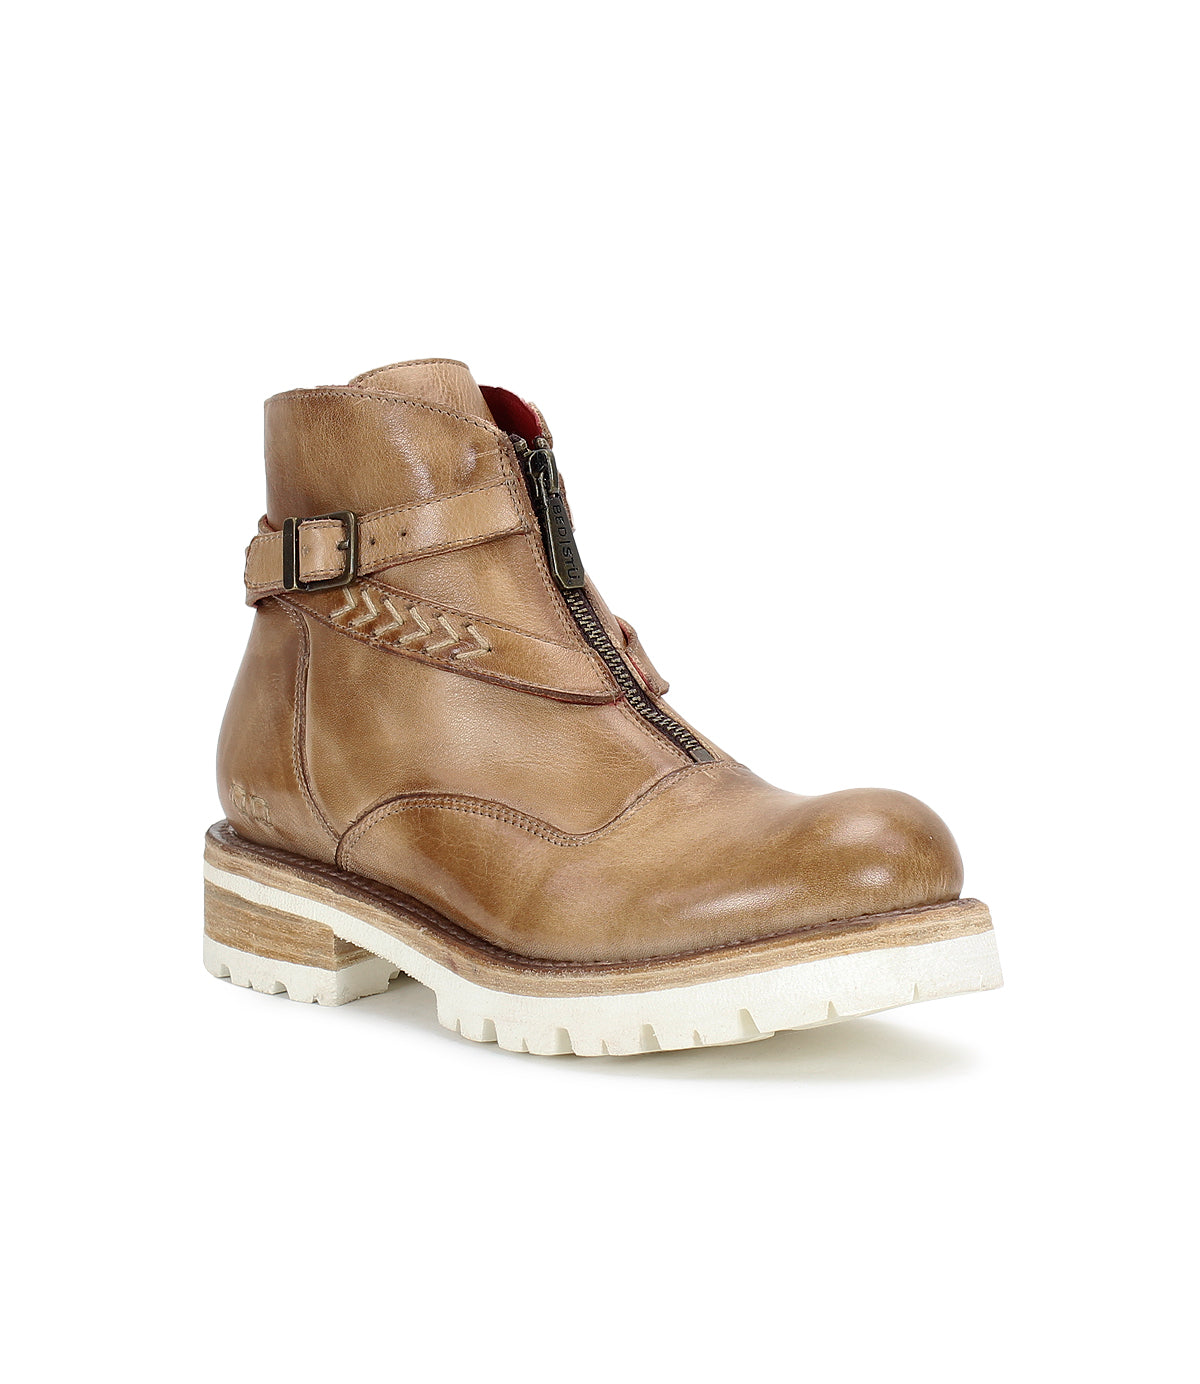 A women's tan leather ankle boot with a zipper called Dessa by Bed Stu.